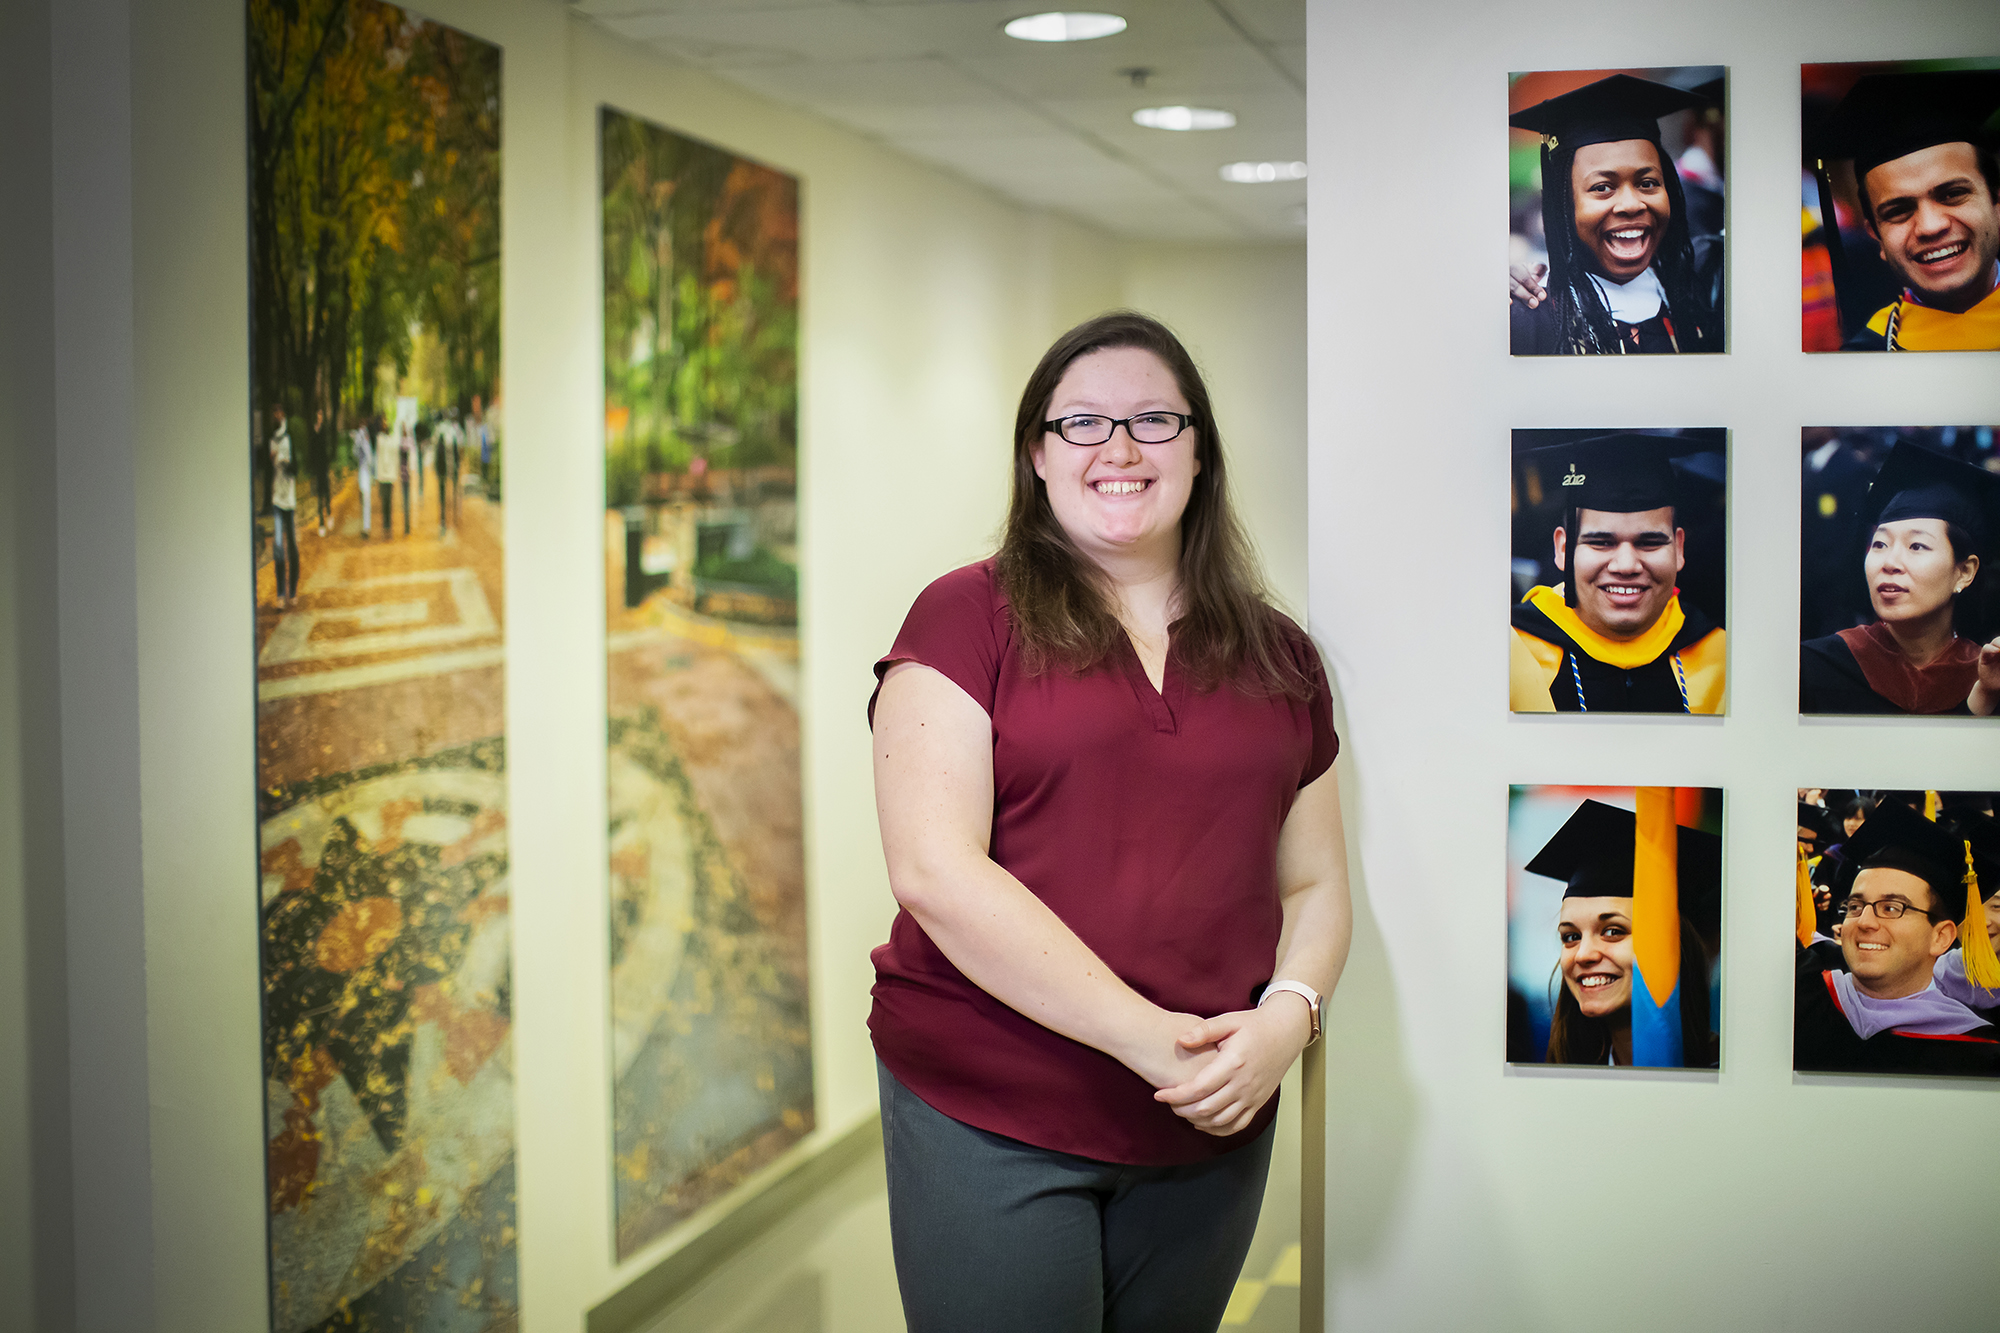 Woman in glasses stands next to six images of students in graduation caps and gowns